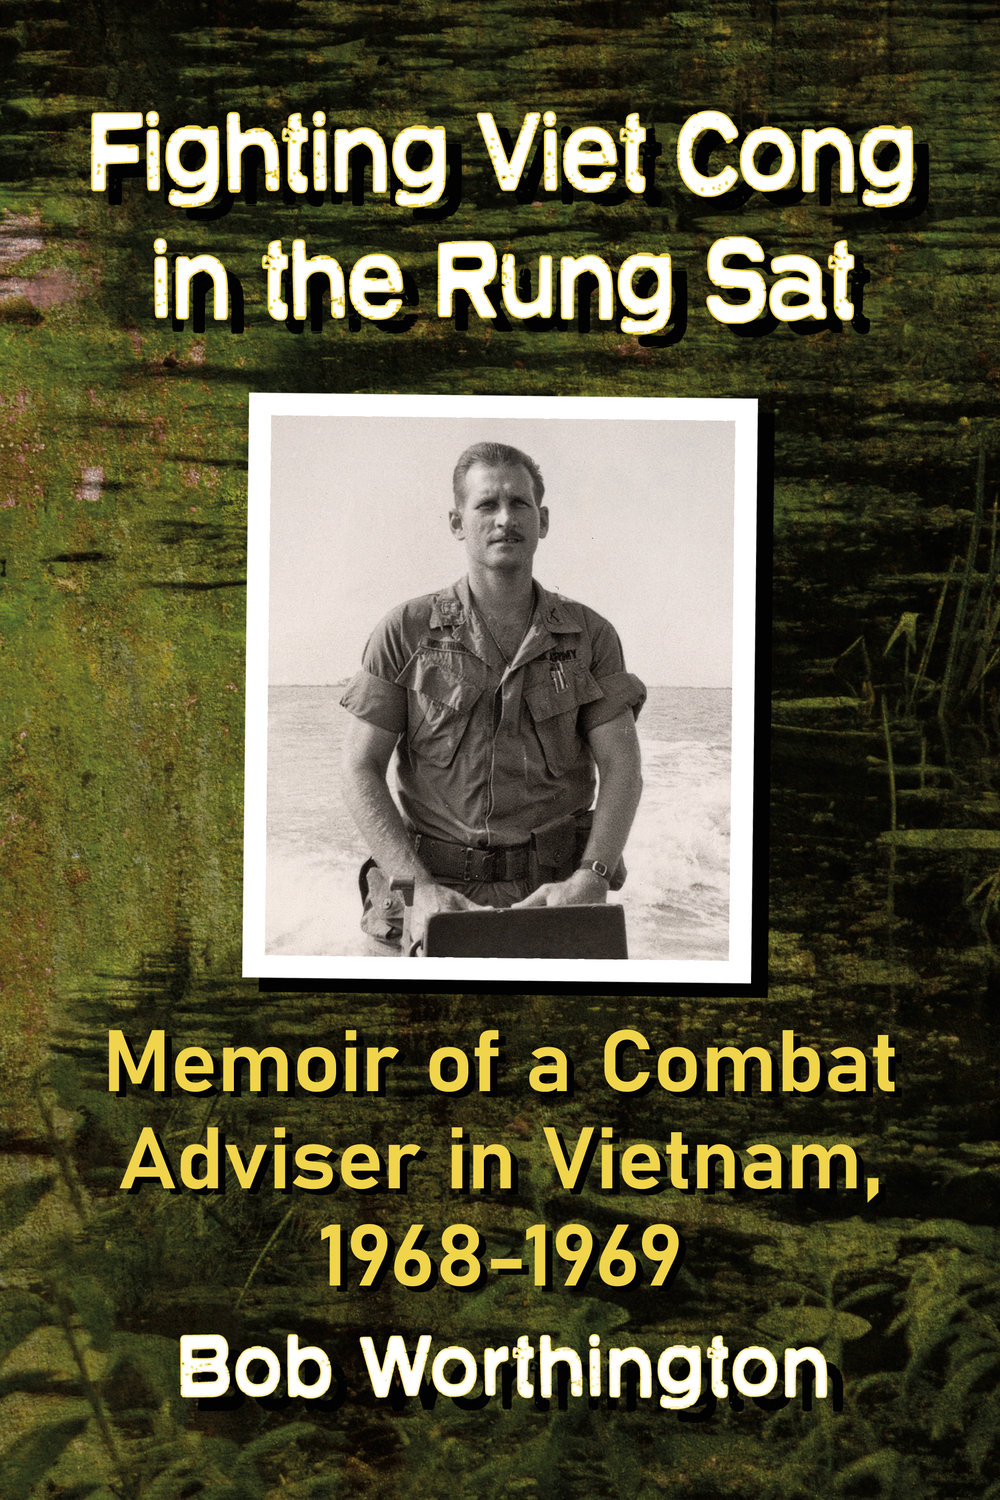 The book cover for Bob Worthington's latest book, “Fighting Viet Cong in the Rung Sat."